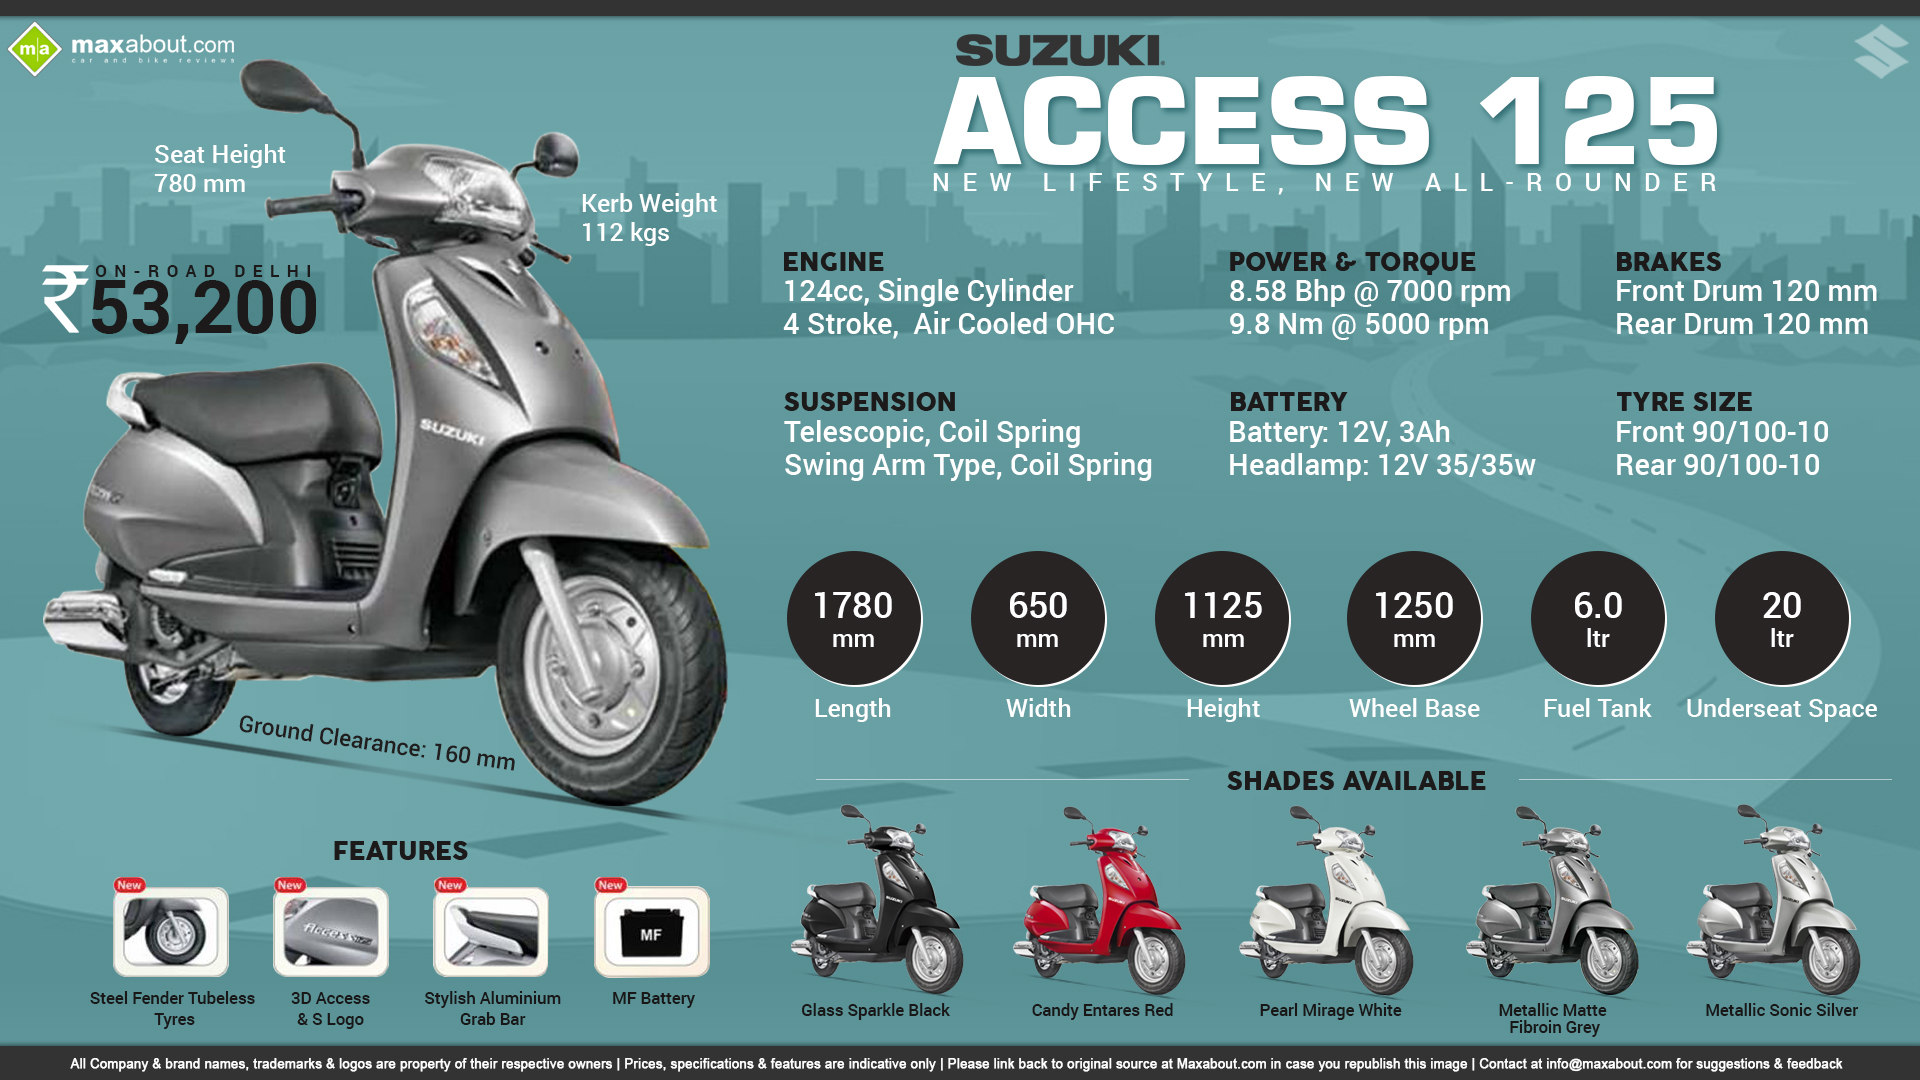 Quick Facts about New Suzuki Access 125